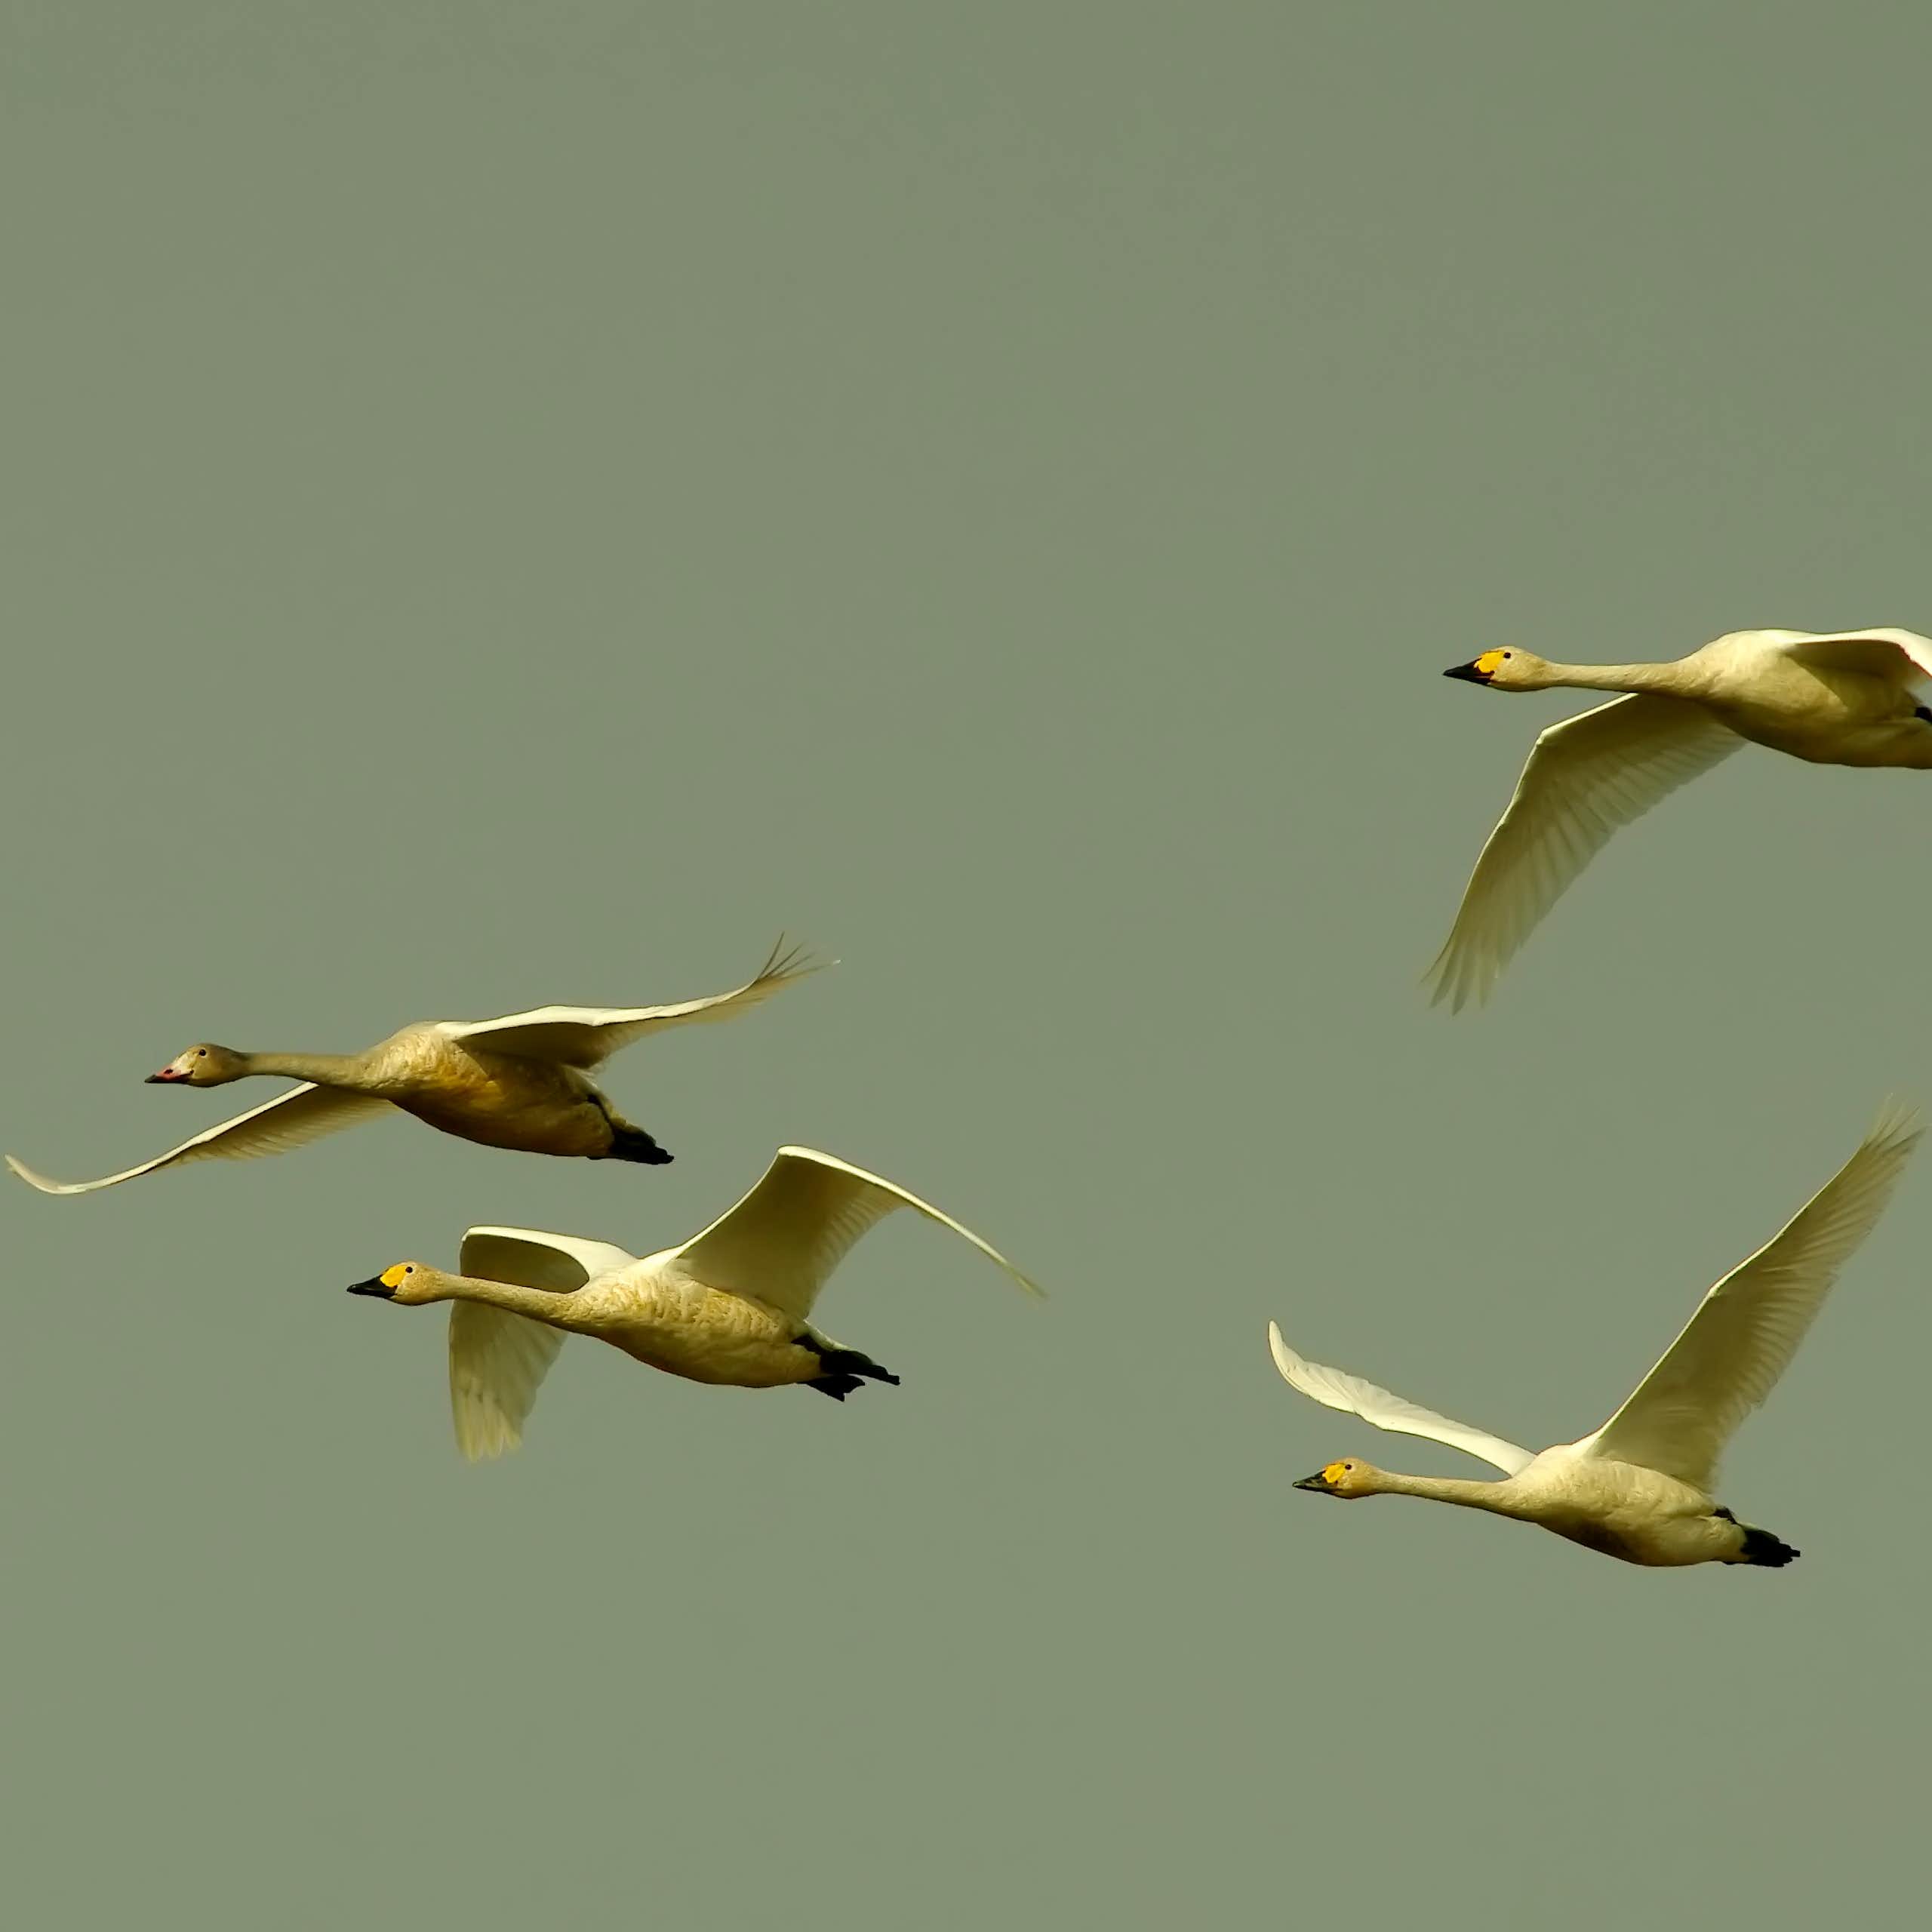 Five swans flying against a grey sky.